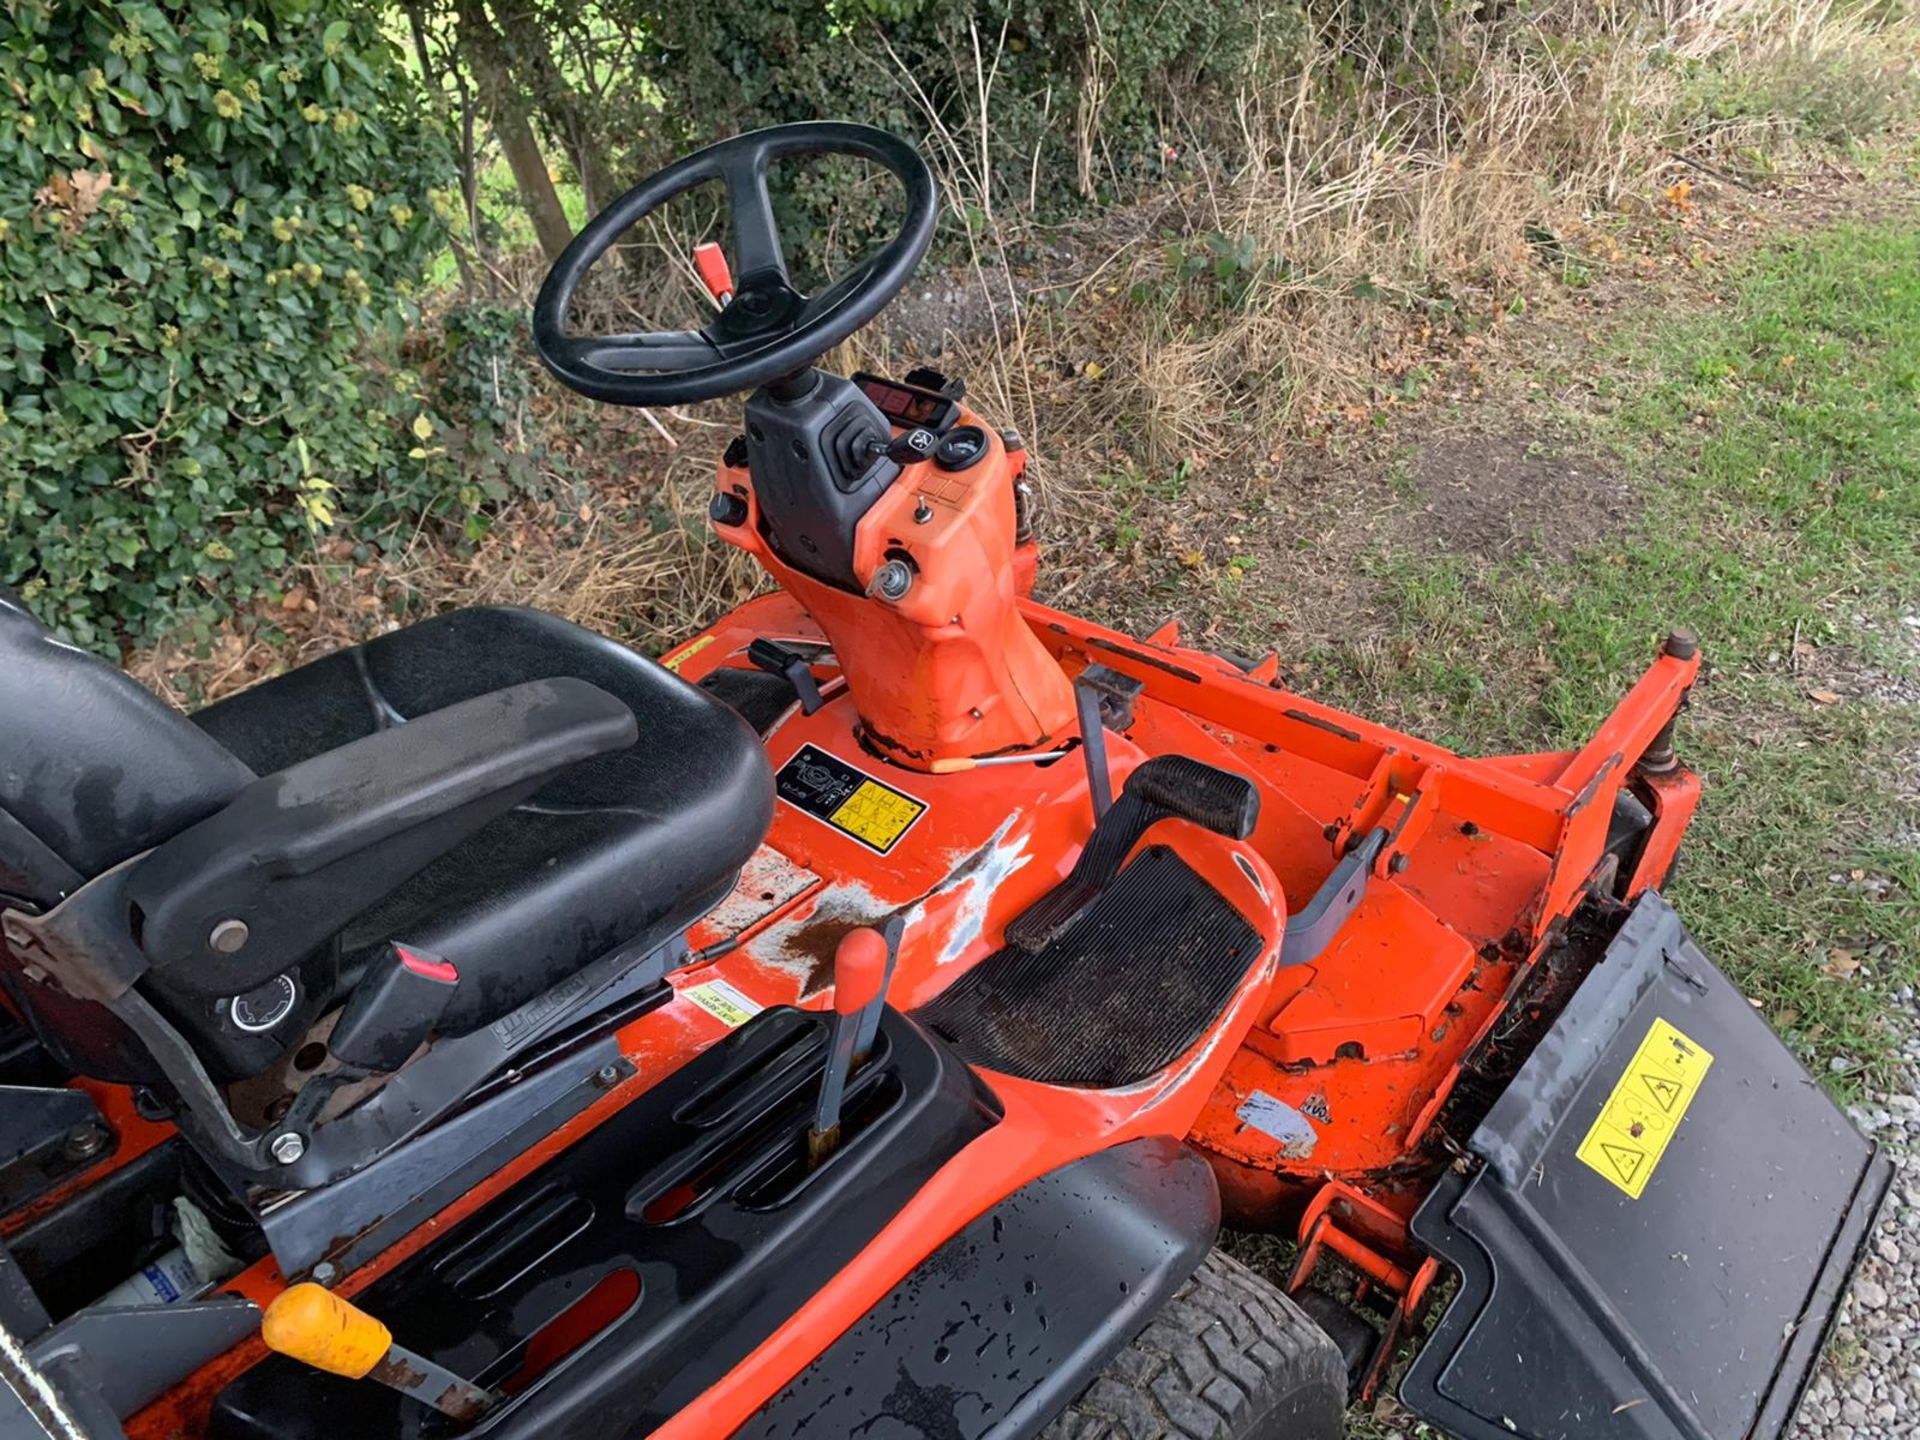 KUBOTA F2880 DIESEL RIDE ON MOWER, RUNS DRIVES AND CUTS, SHOWING A LOW 2640 HOURS *PLUS VAT* - Image 10 of 10